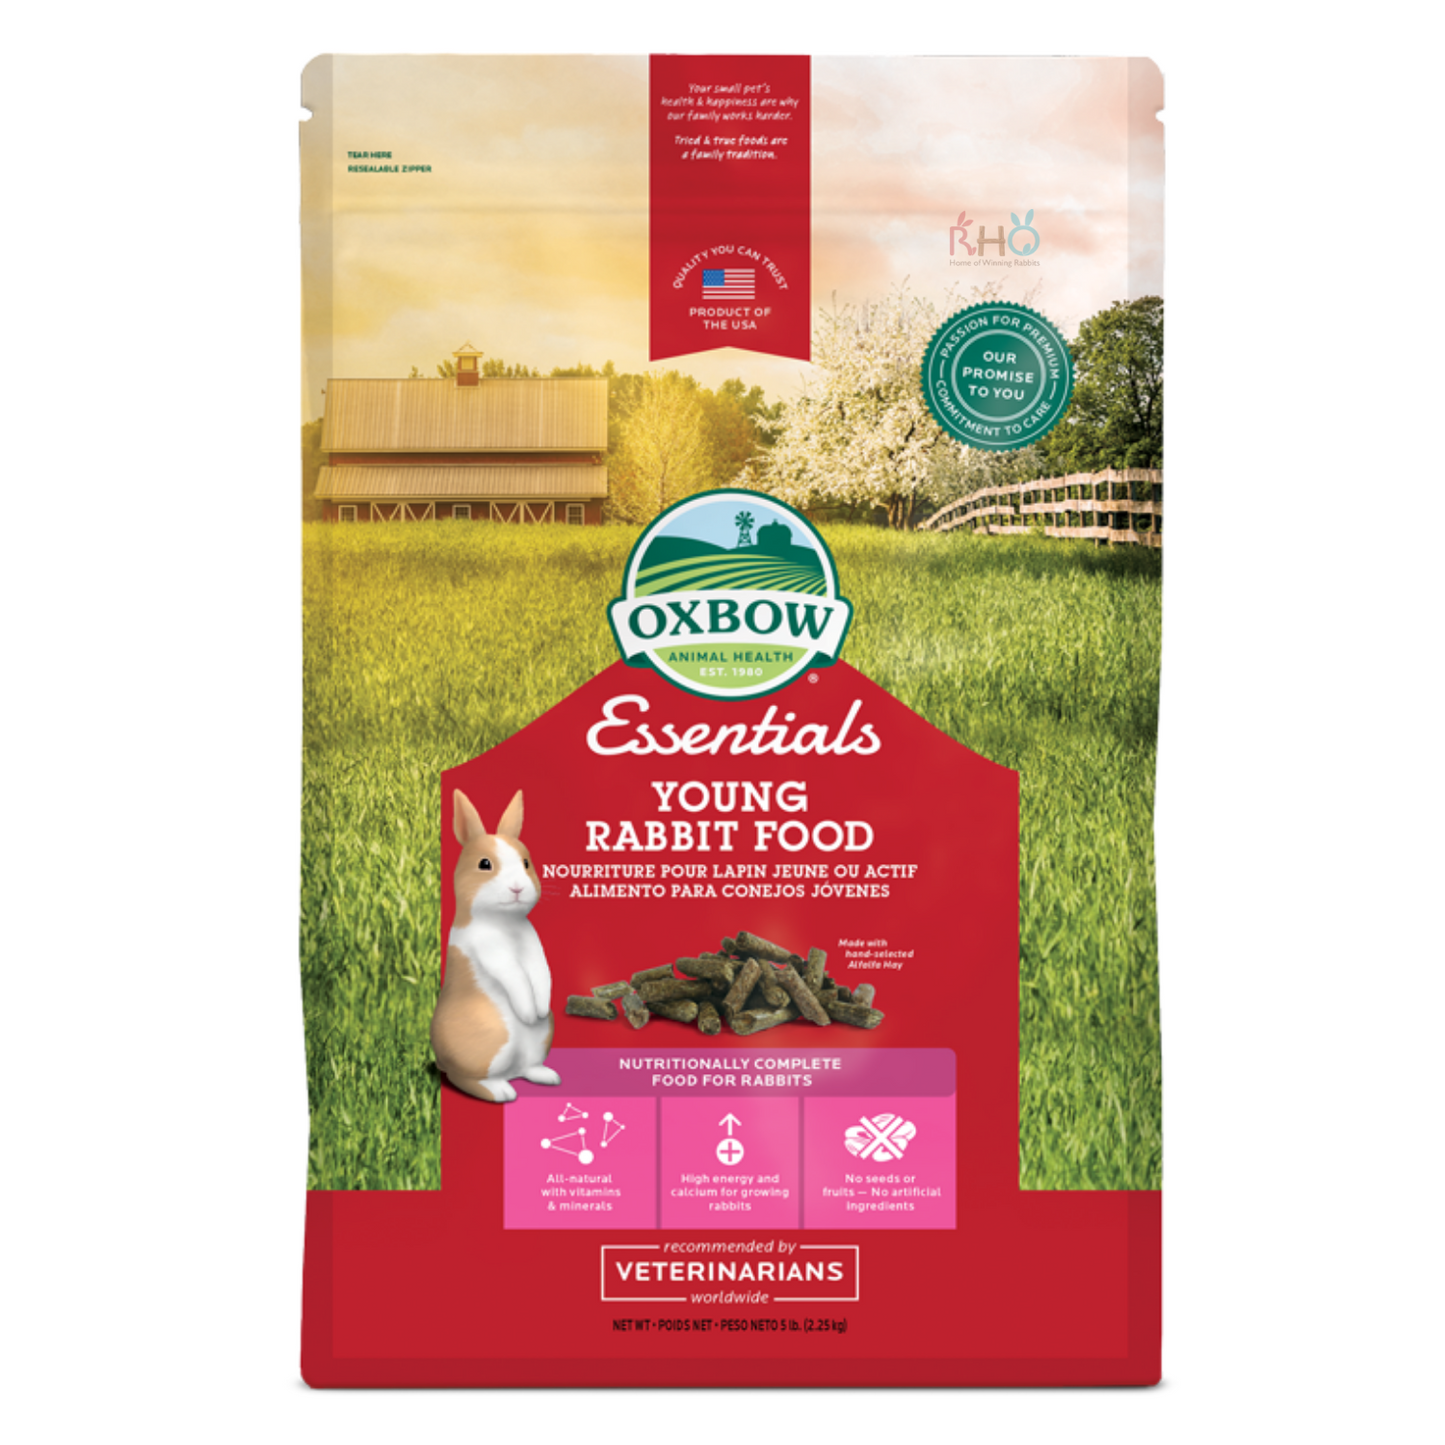 Oxbow Essentials - Young Rabbit Food (5 lbs)